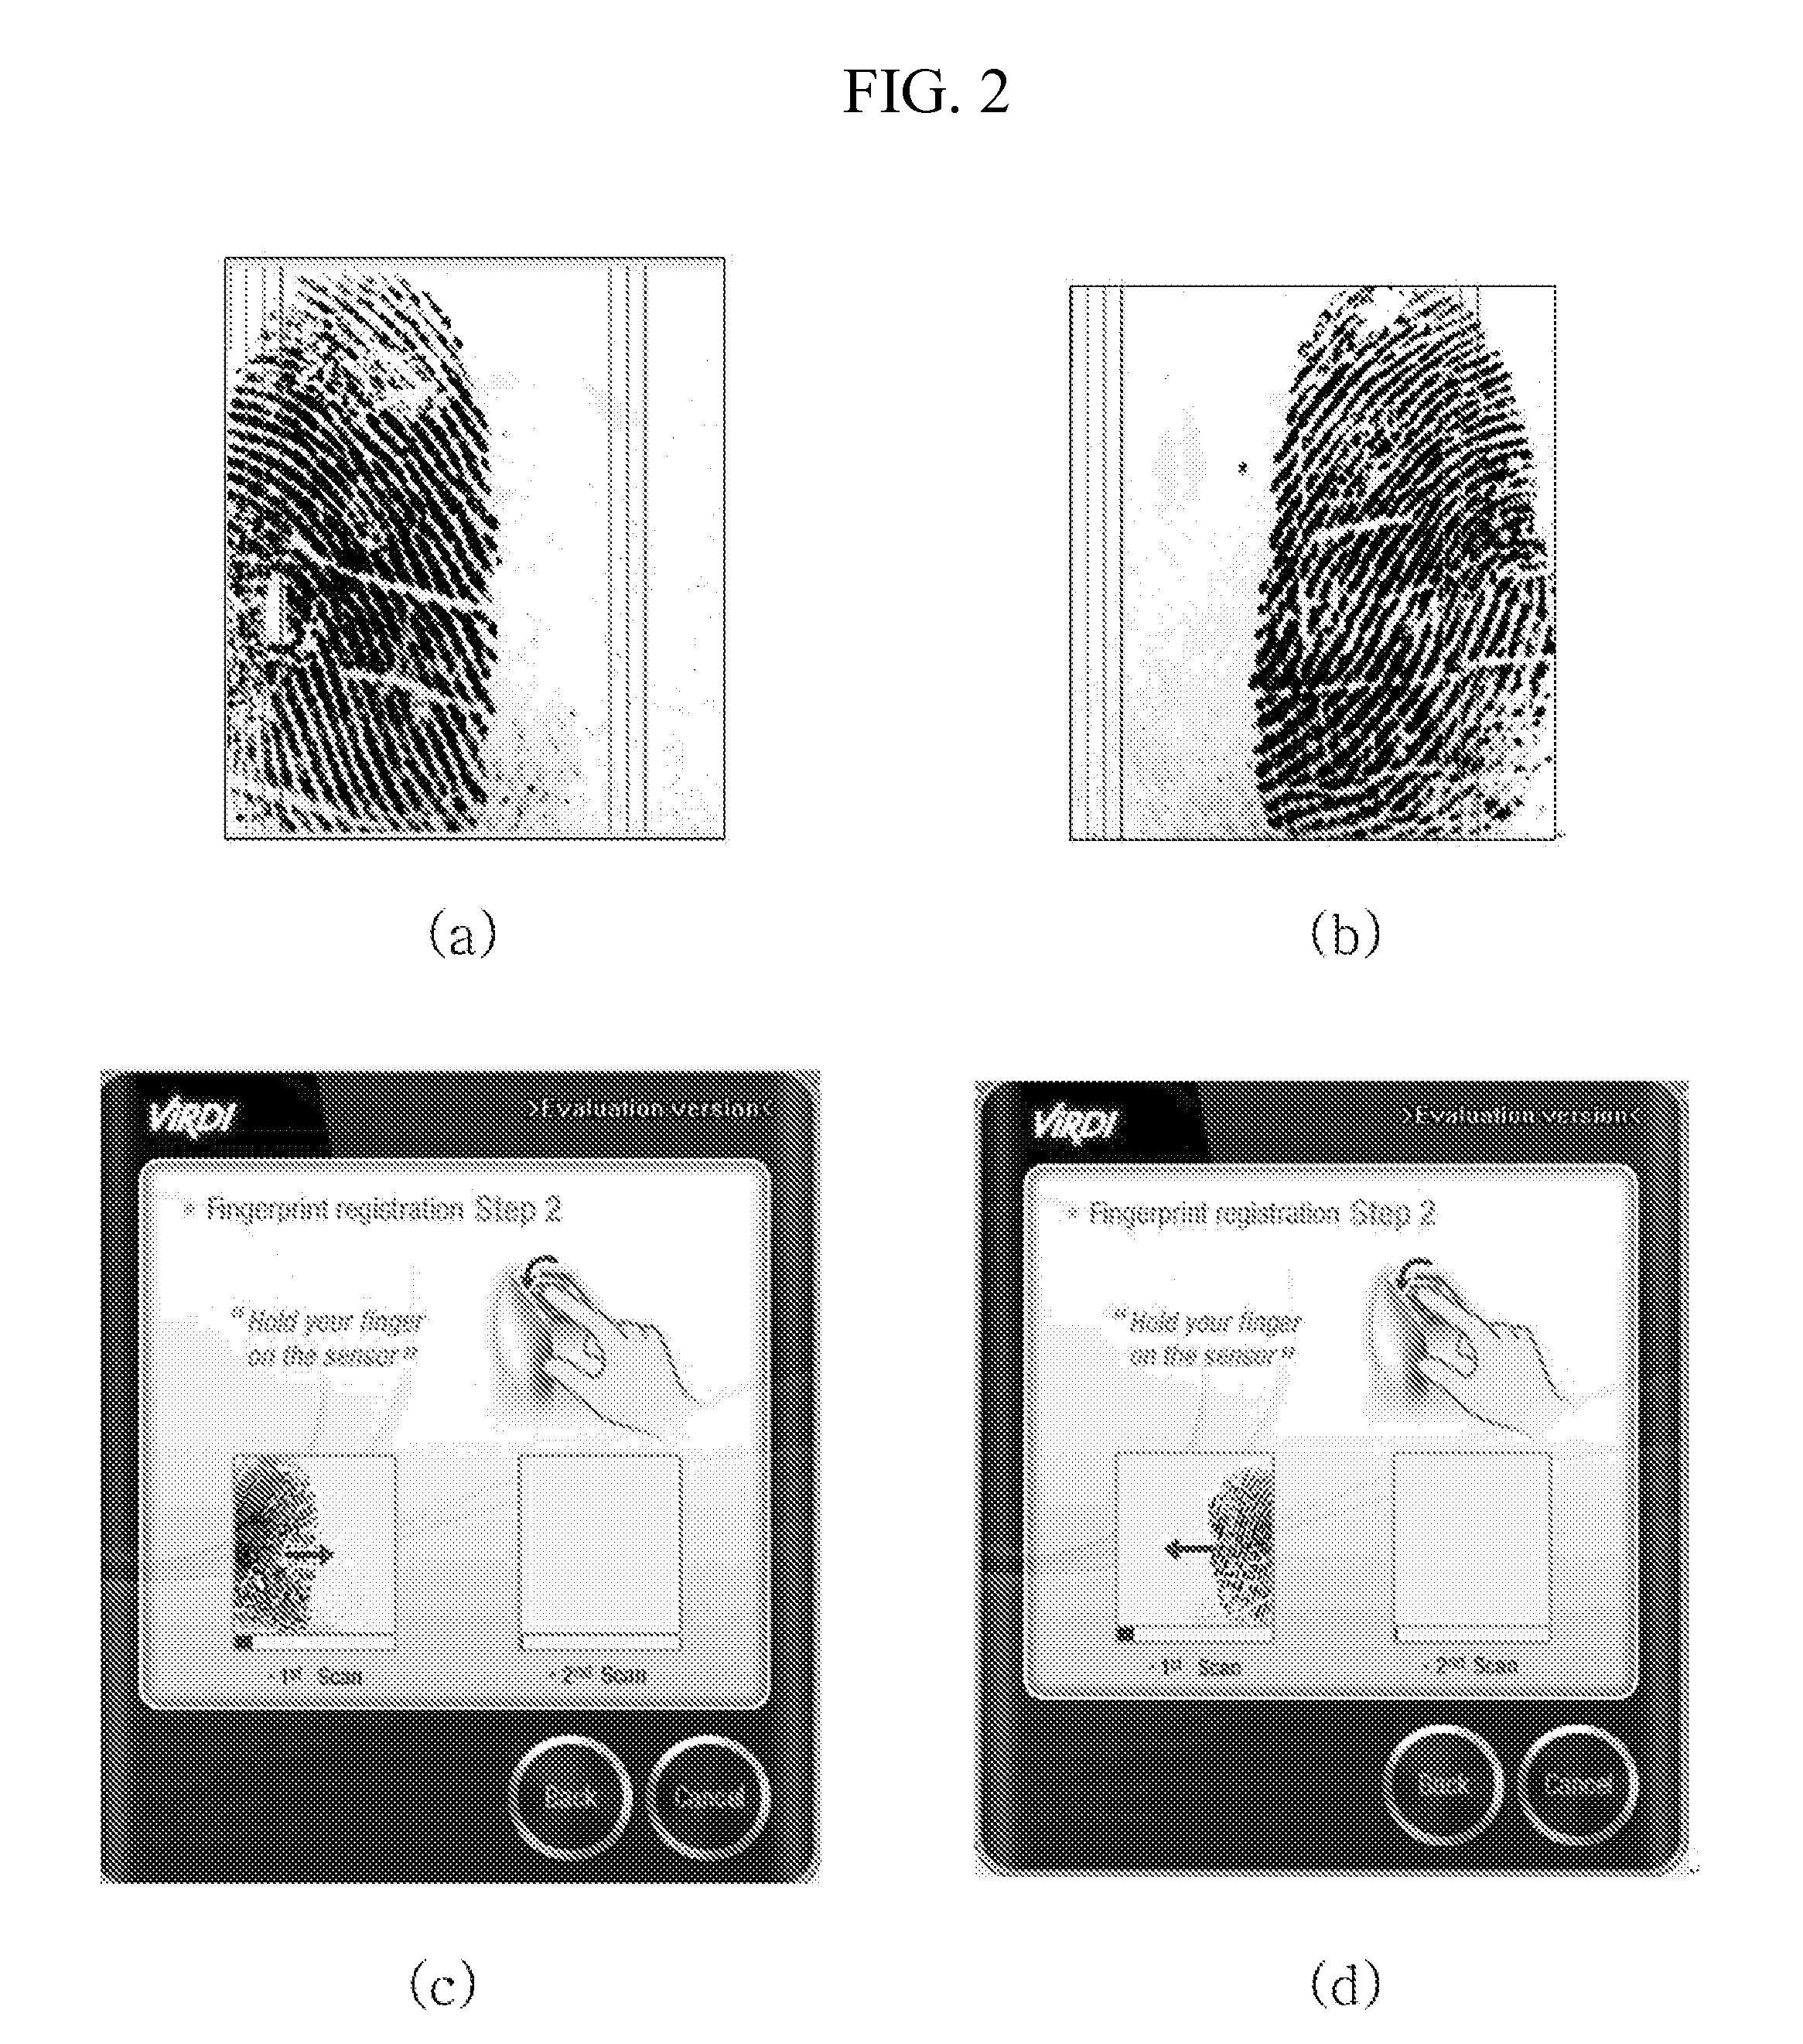 Fingerprint recognition apparatus and method thereof of acquiring fingerprint data